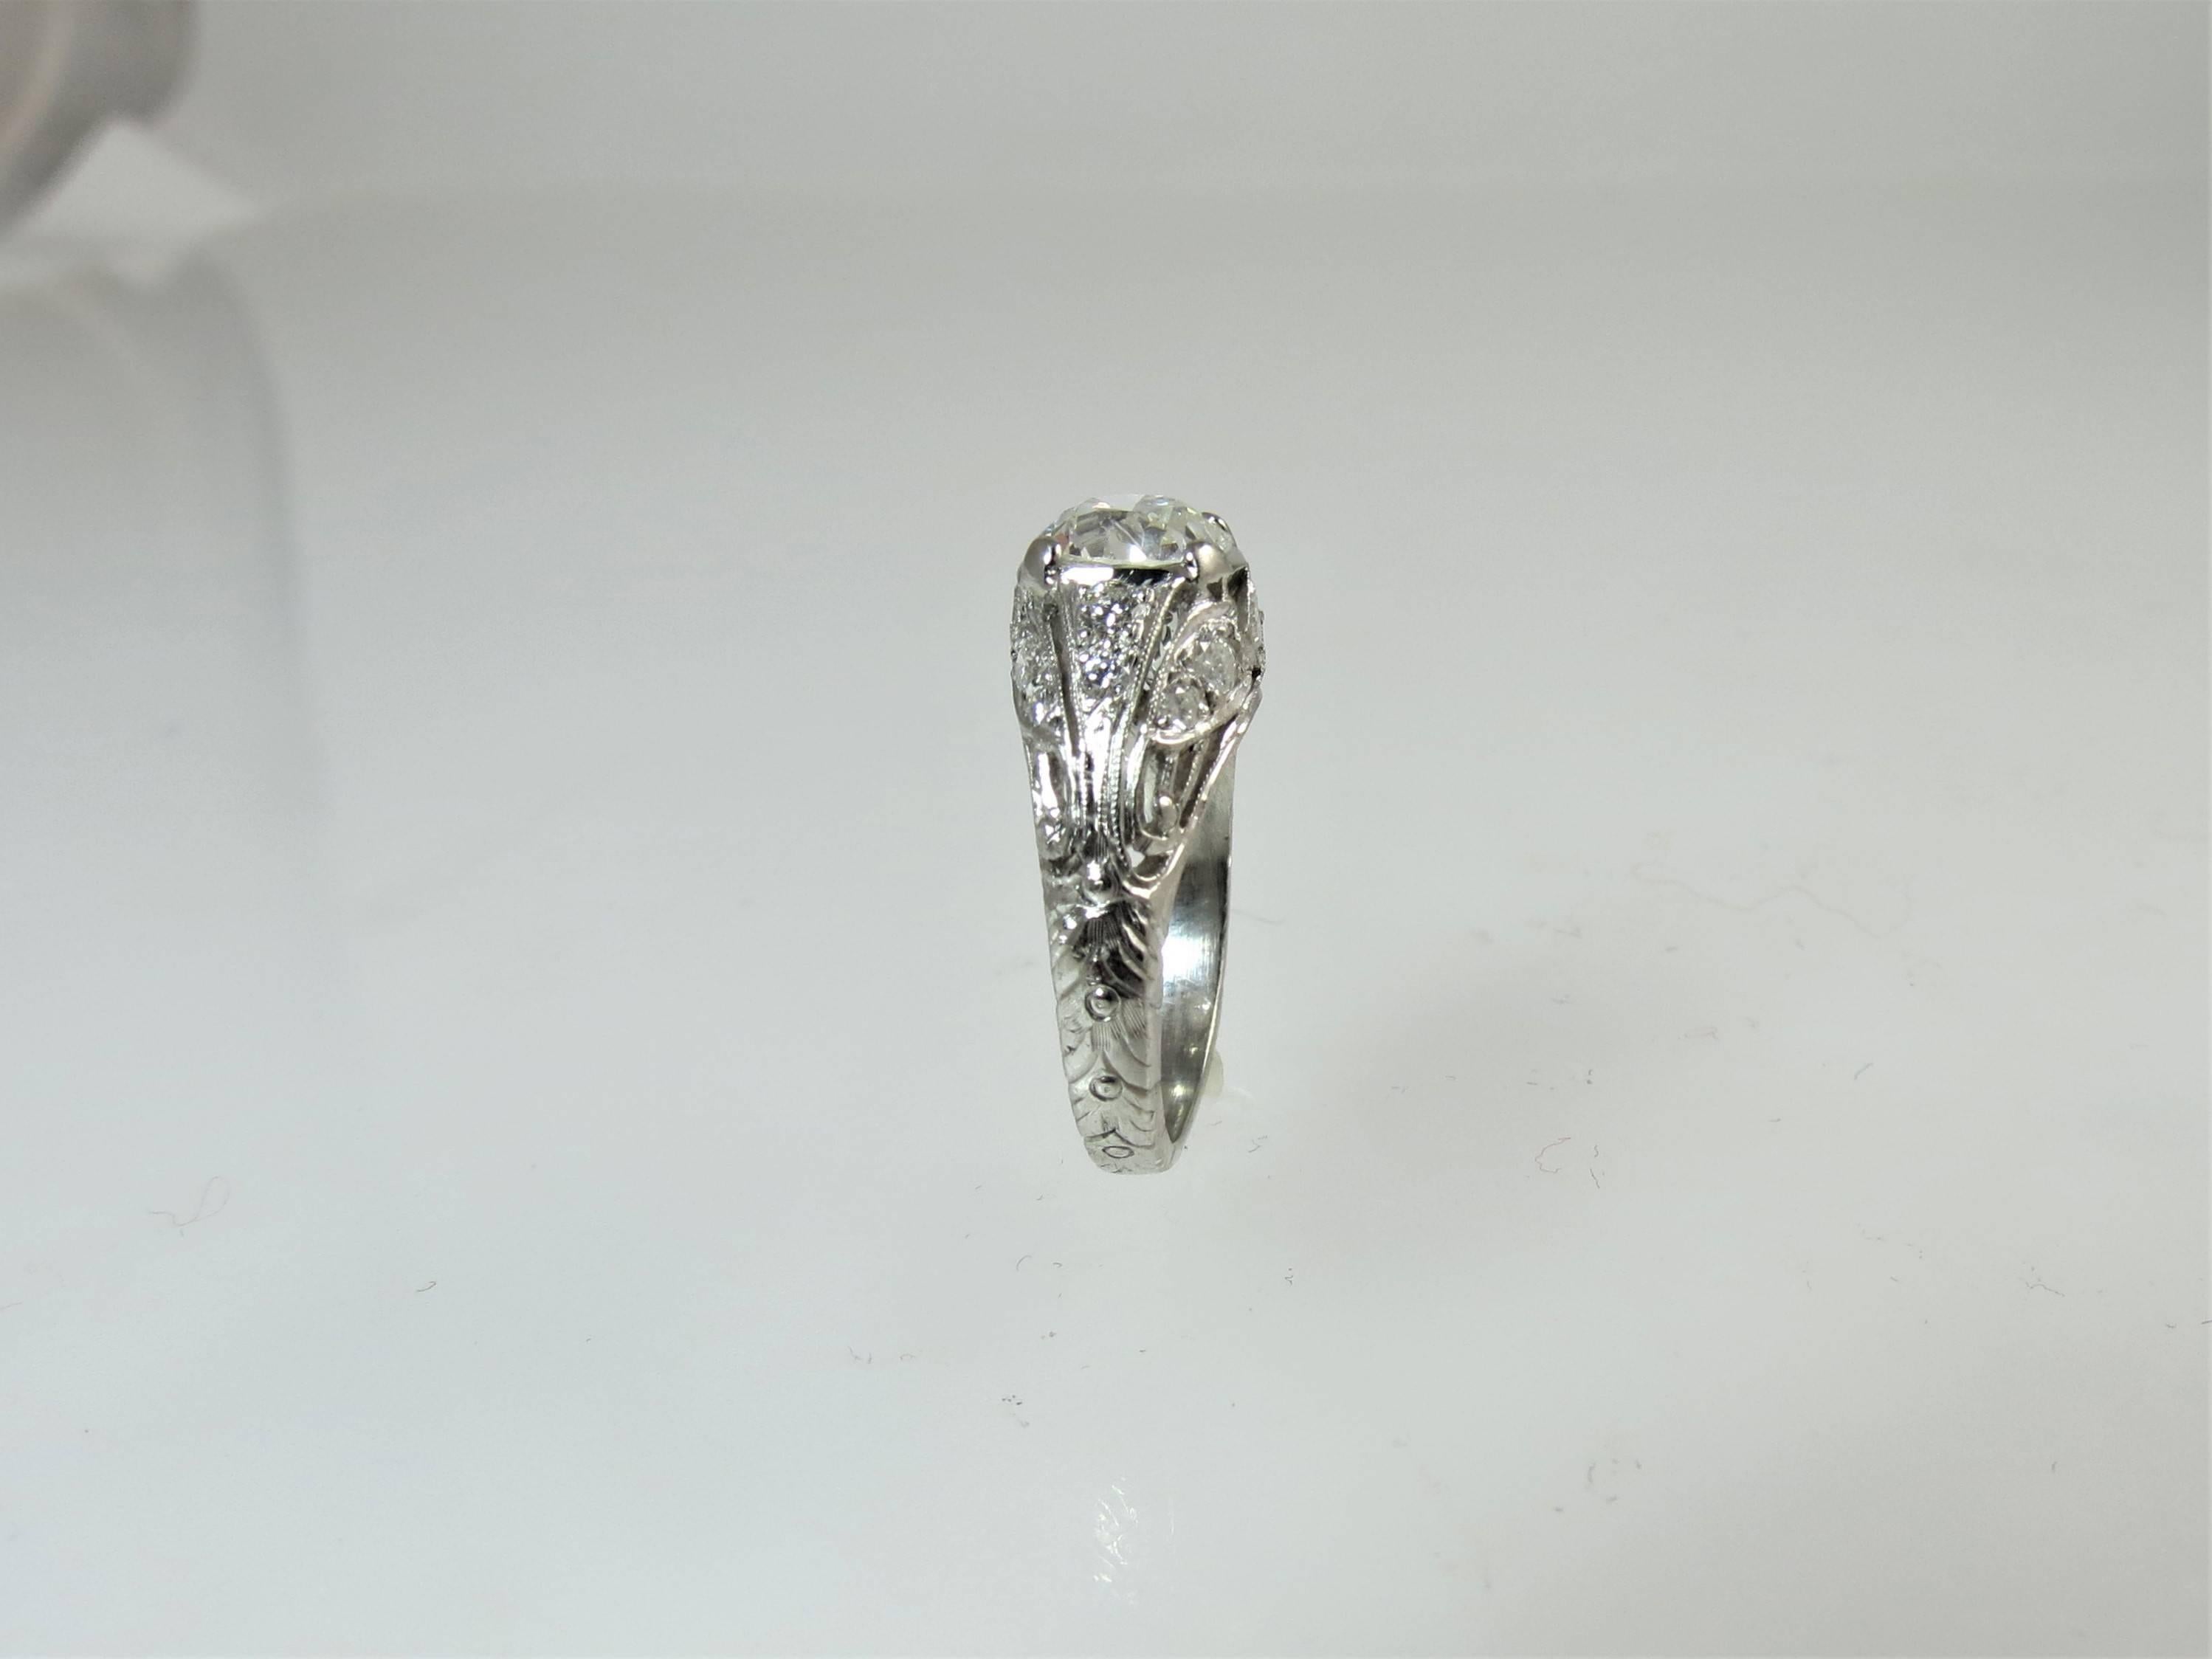 Vintage Platinum Ring, prong set with one European cut diamond, weighing 1.25cts, GIA certified (lab report #1182914479) F color, SI2 clarity and 14 bead set,  full cut round diamonds weighing .47cts, F color, VS clarity 
Finger size 5, may be sized